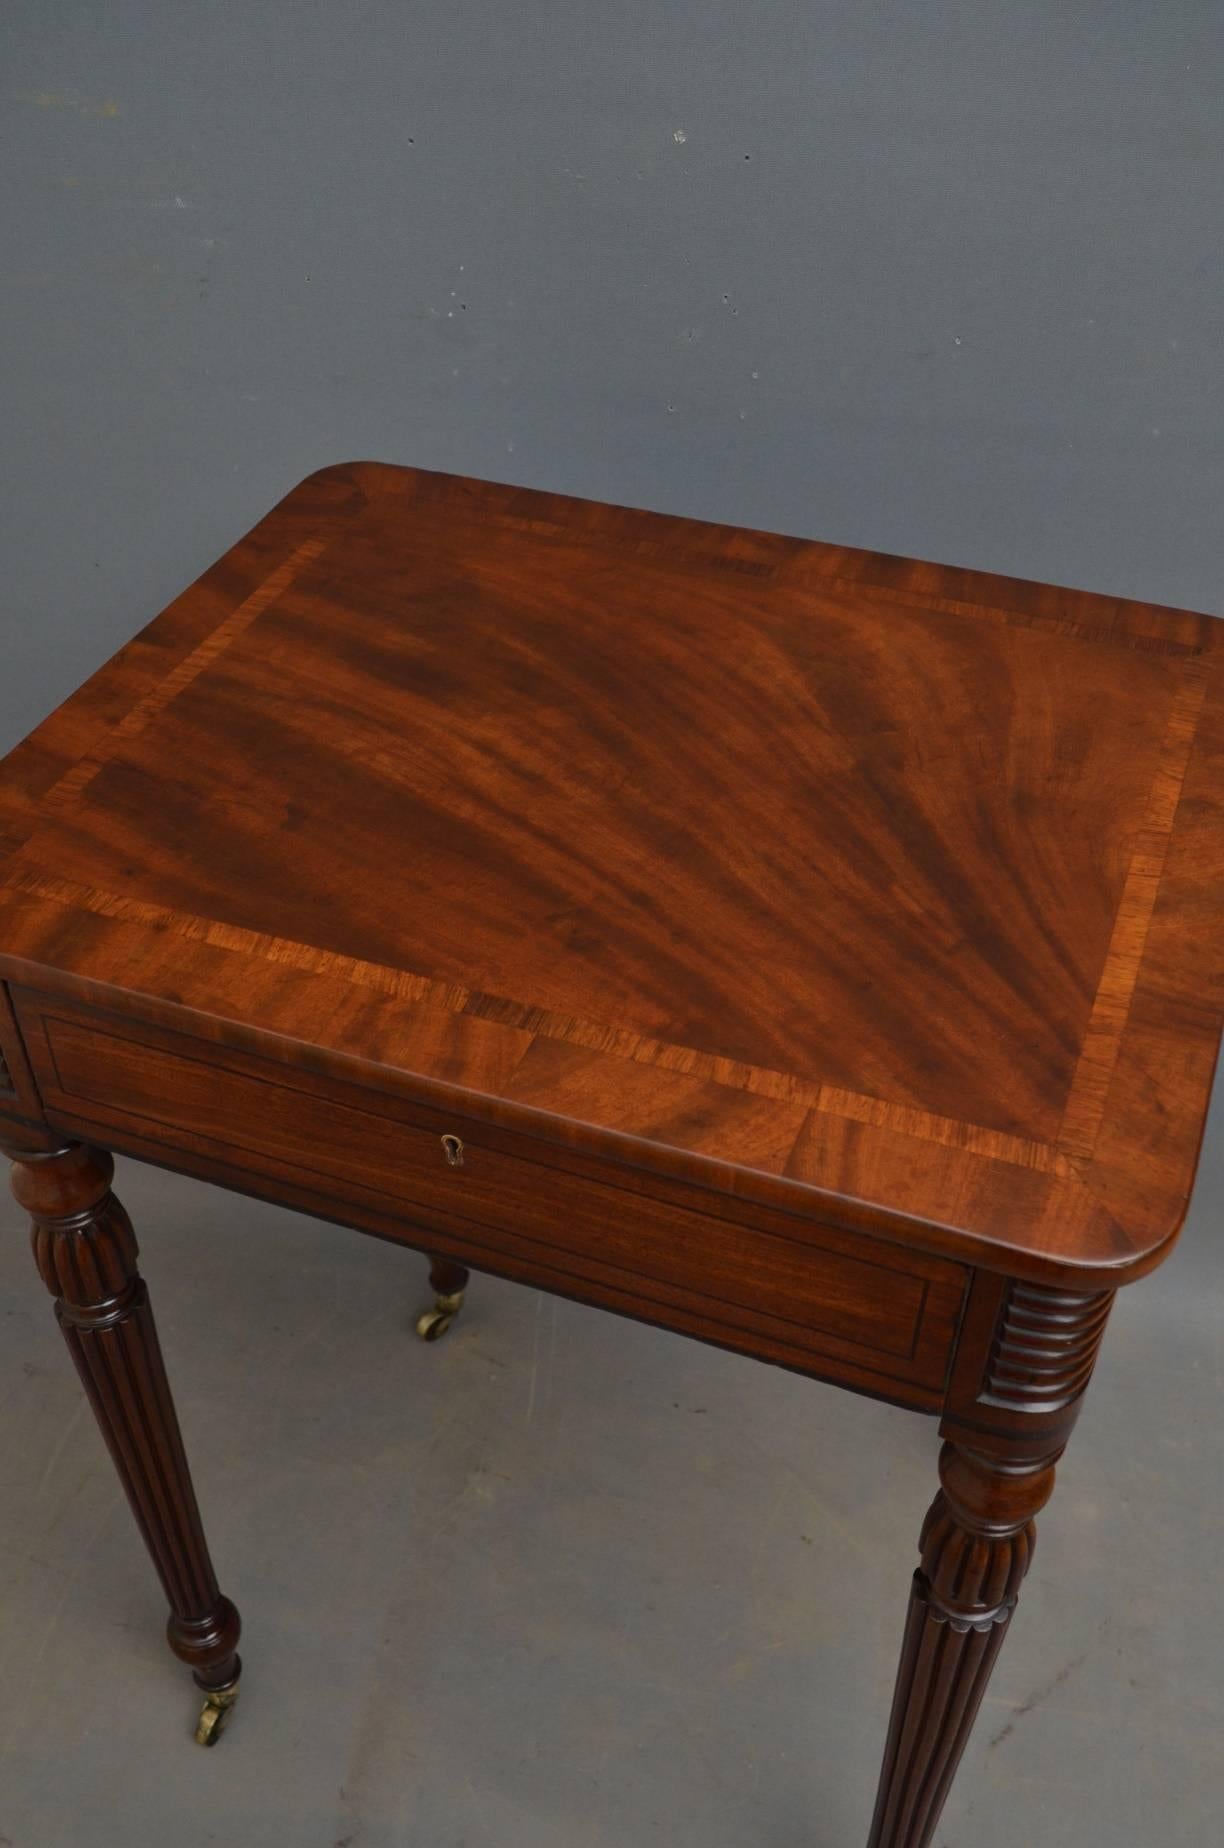 Sn4001. Fine quality Regency side table in mahogany, having figured mahogany, banded top above string inlaid frieze drawer, standing on turned, reeded legs terminating in original brass castors. This elegant table is in excellent home ready